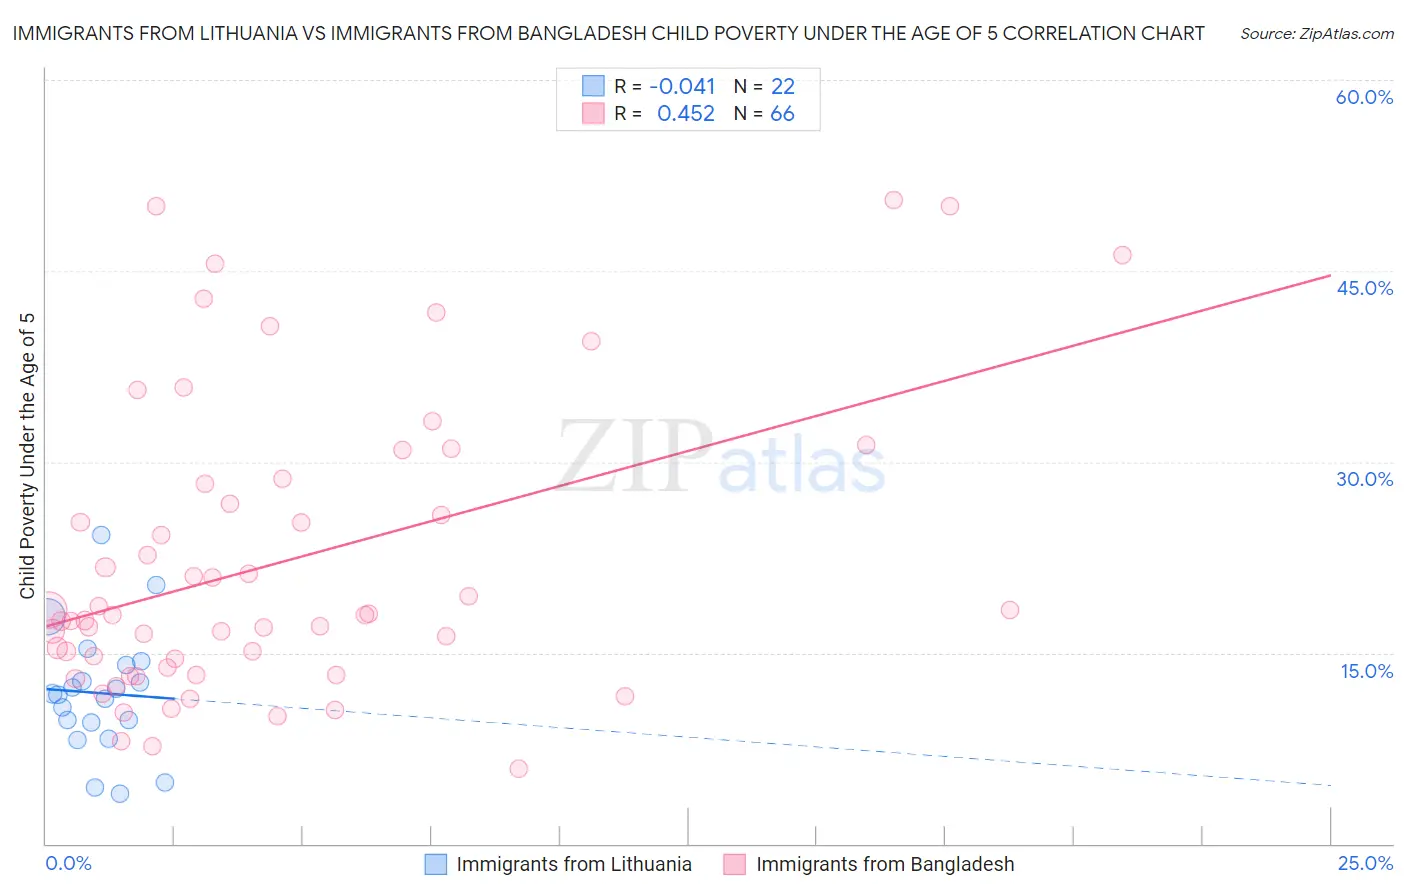 Immigrants from Lithuania vs Immigrants from Bangladesh Child Poverty Under the Age of 5